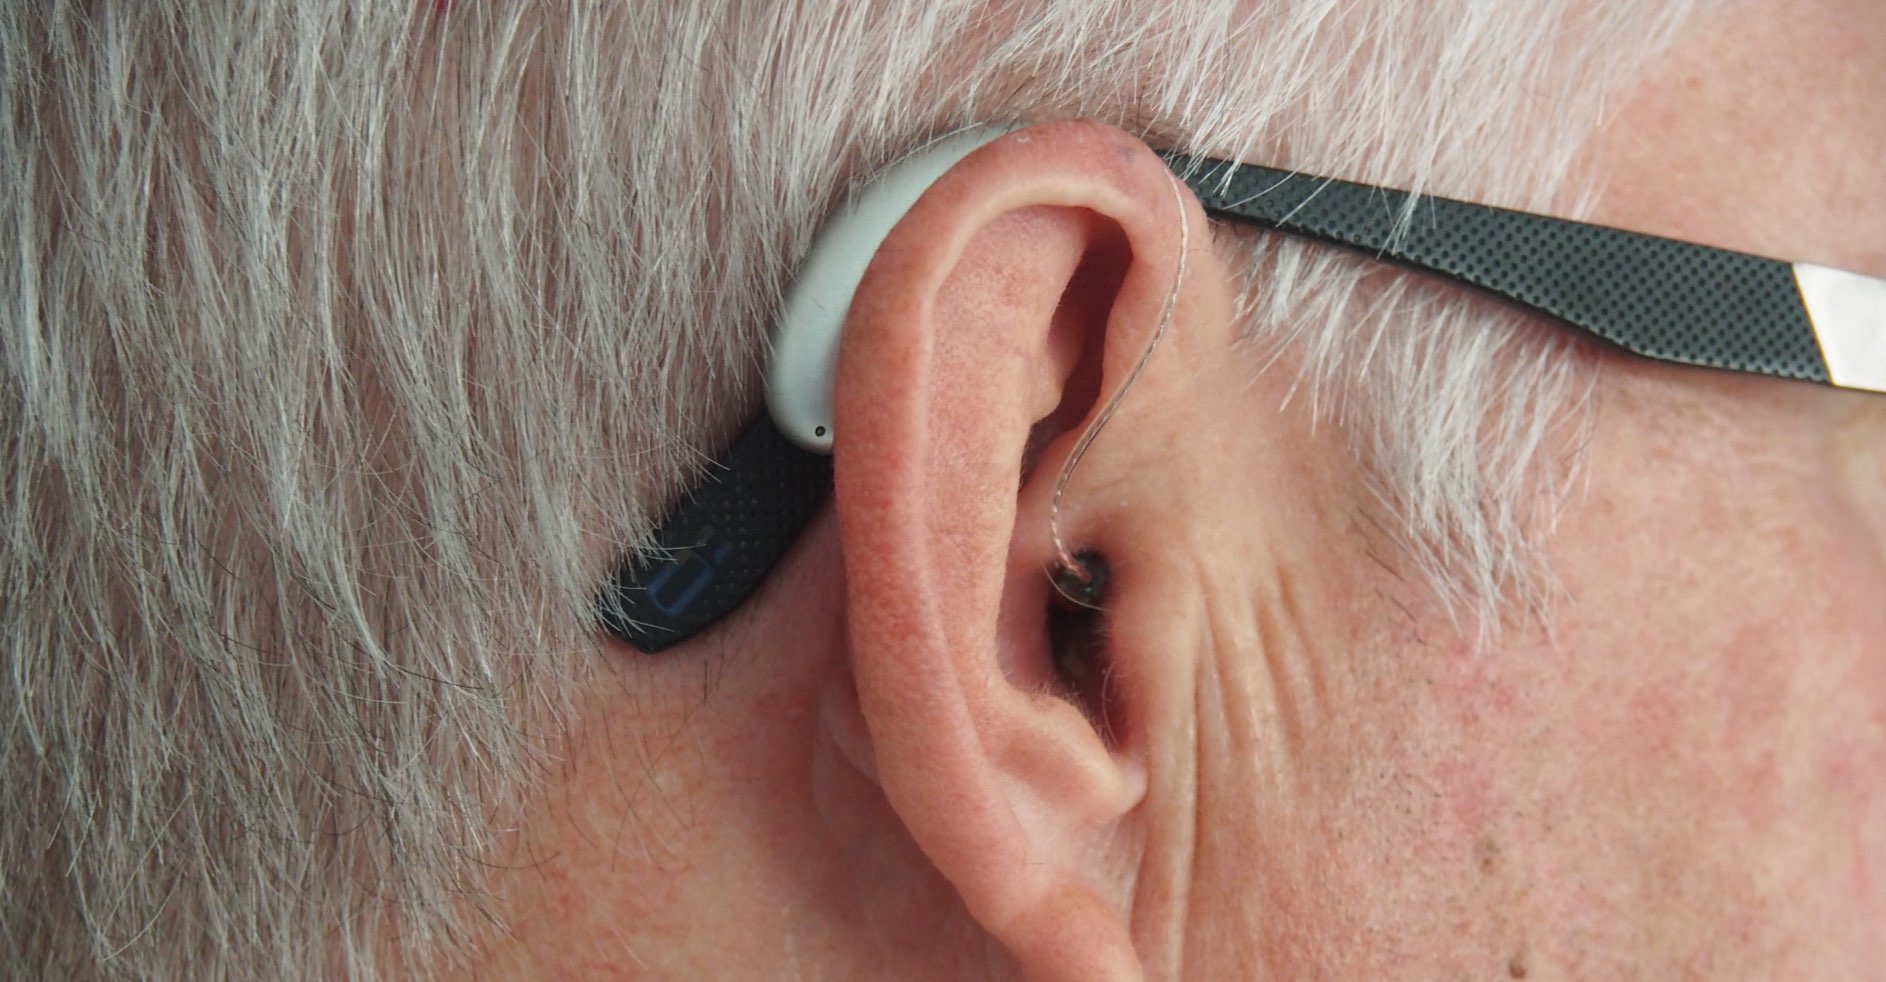 A closeup of a man with a hearing aid